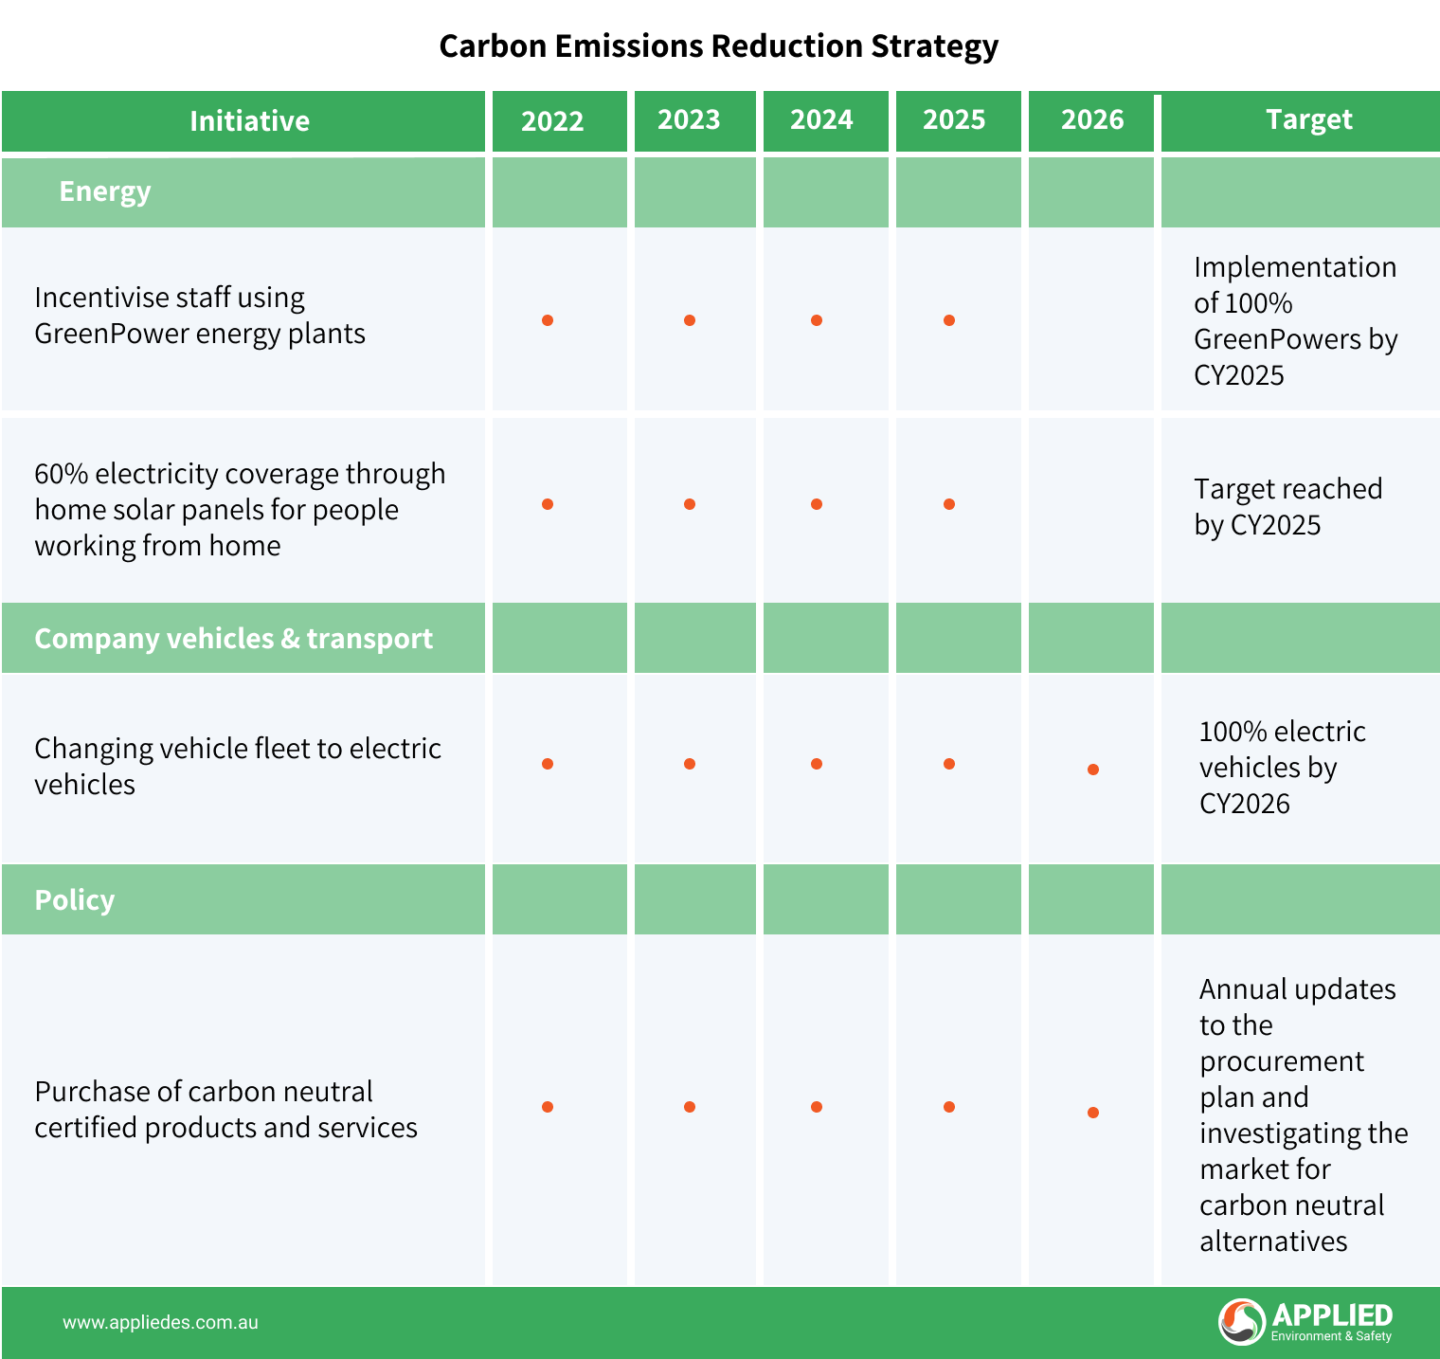 Carbon Emissions Reduction Strategy 2022 - 2026 | Applied Environment & Safety